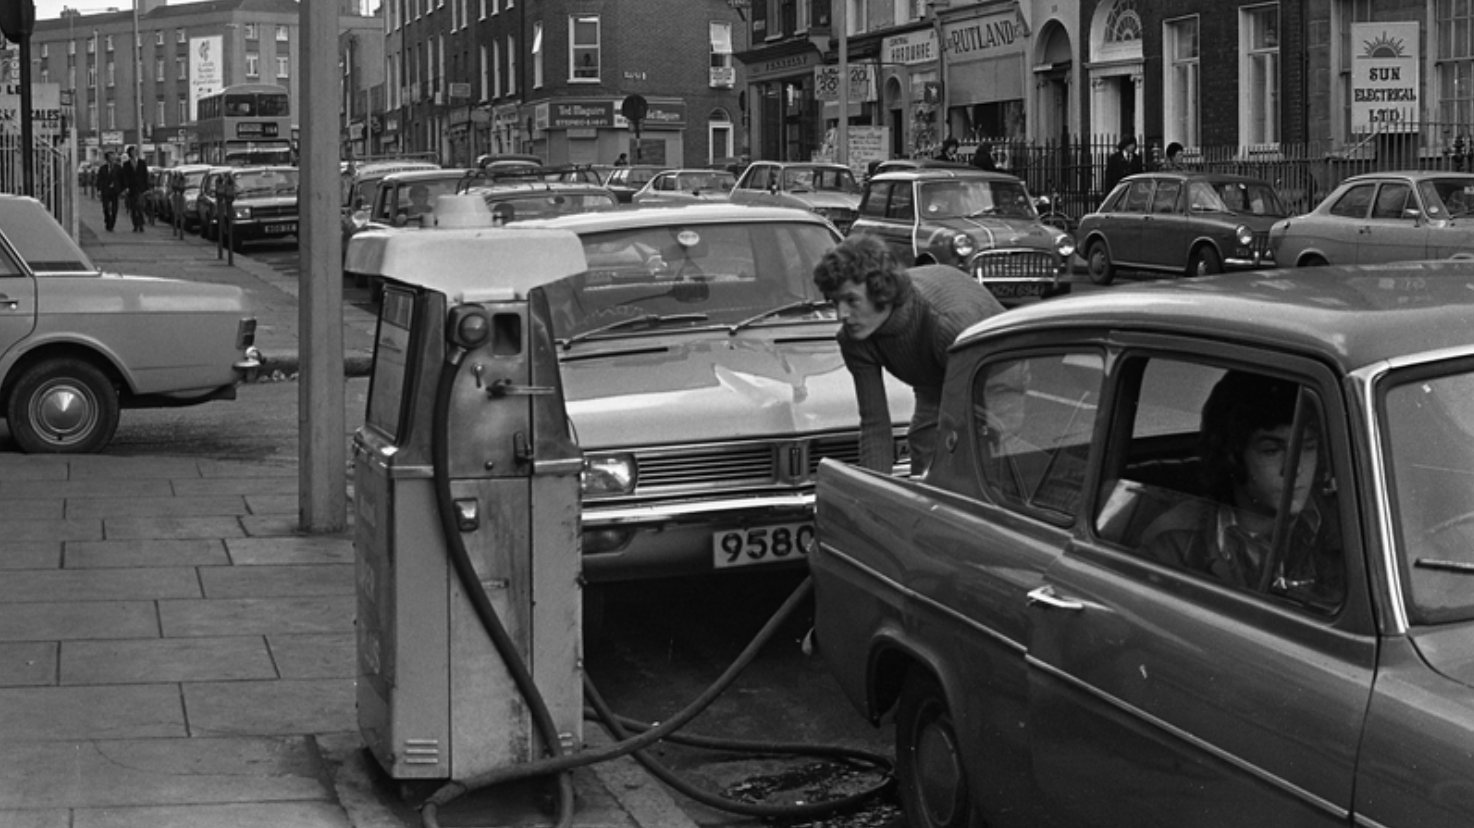 Queuing for petrol in 1970s' Dublin. From University College Cork, available here